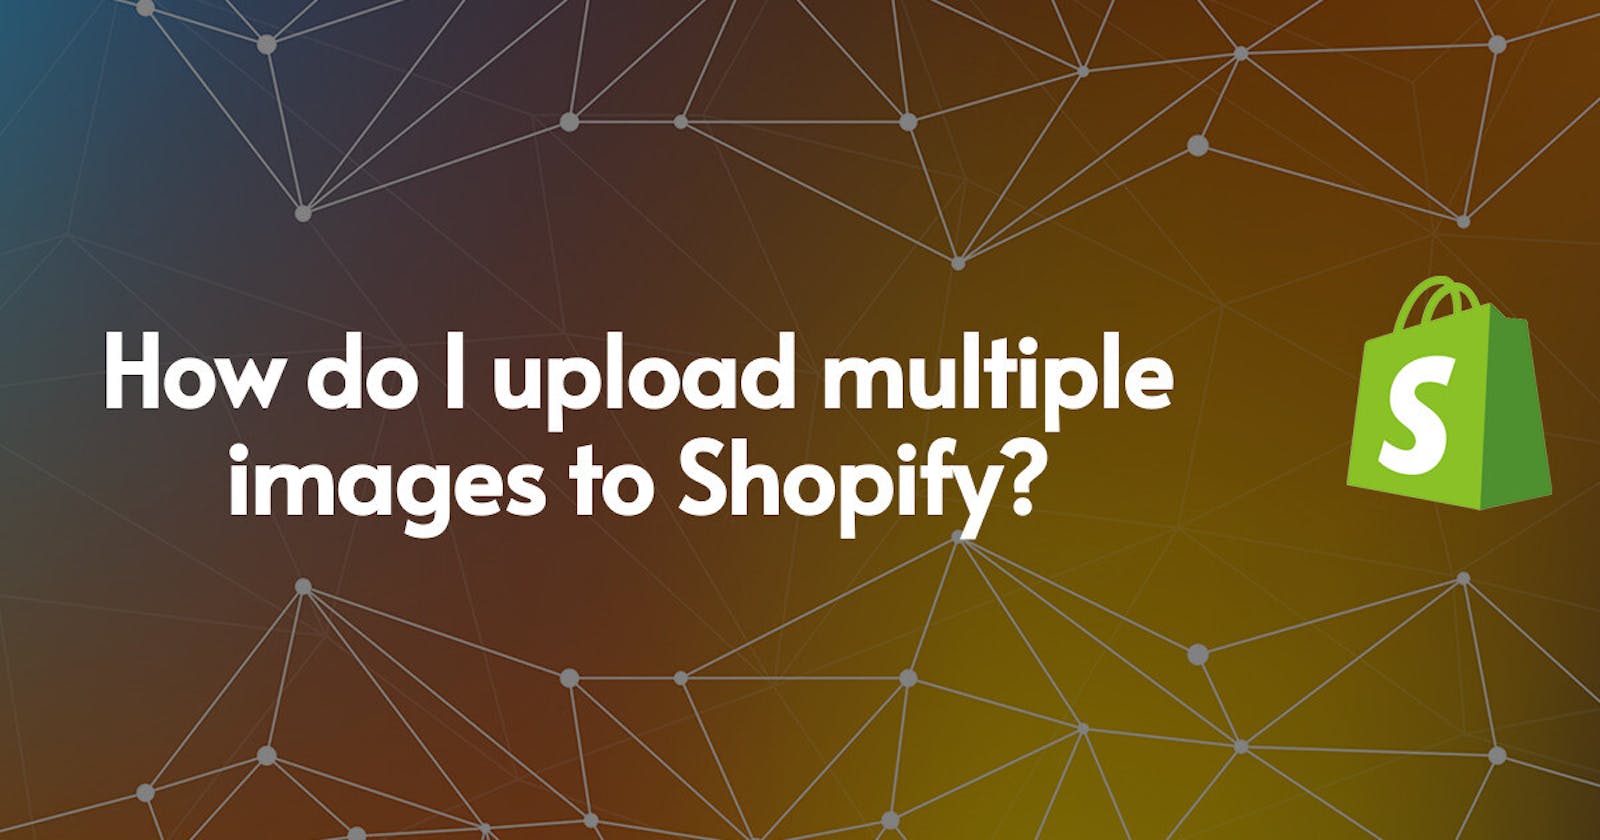 How do I upload multiple images to Shopify?